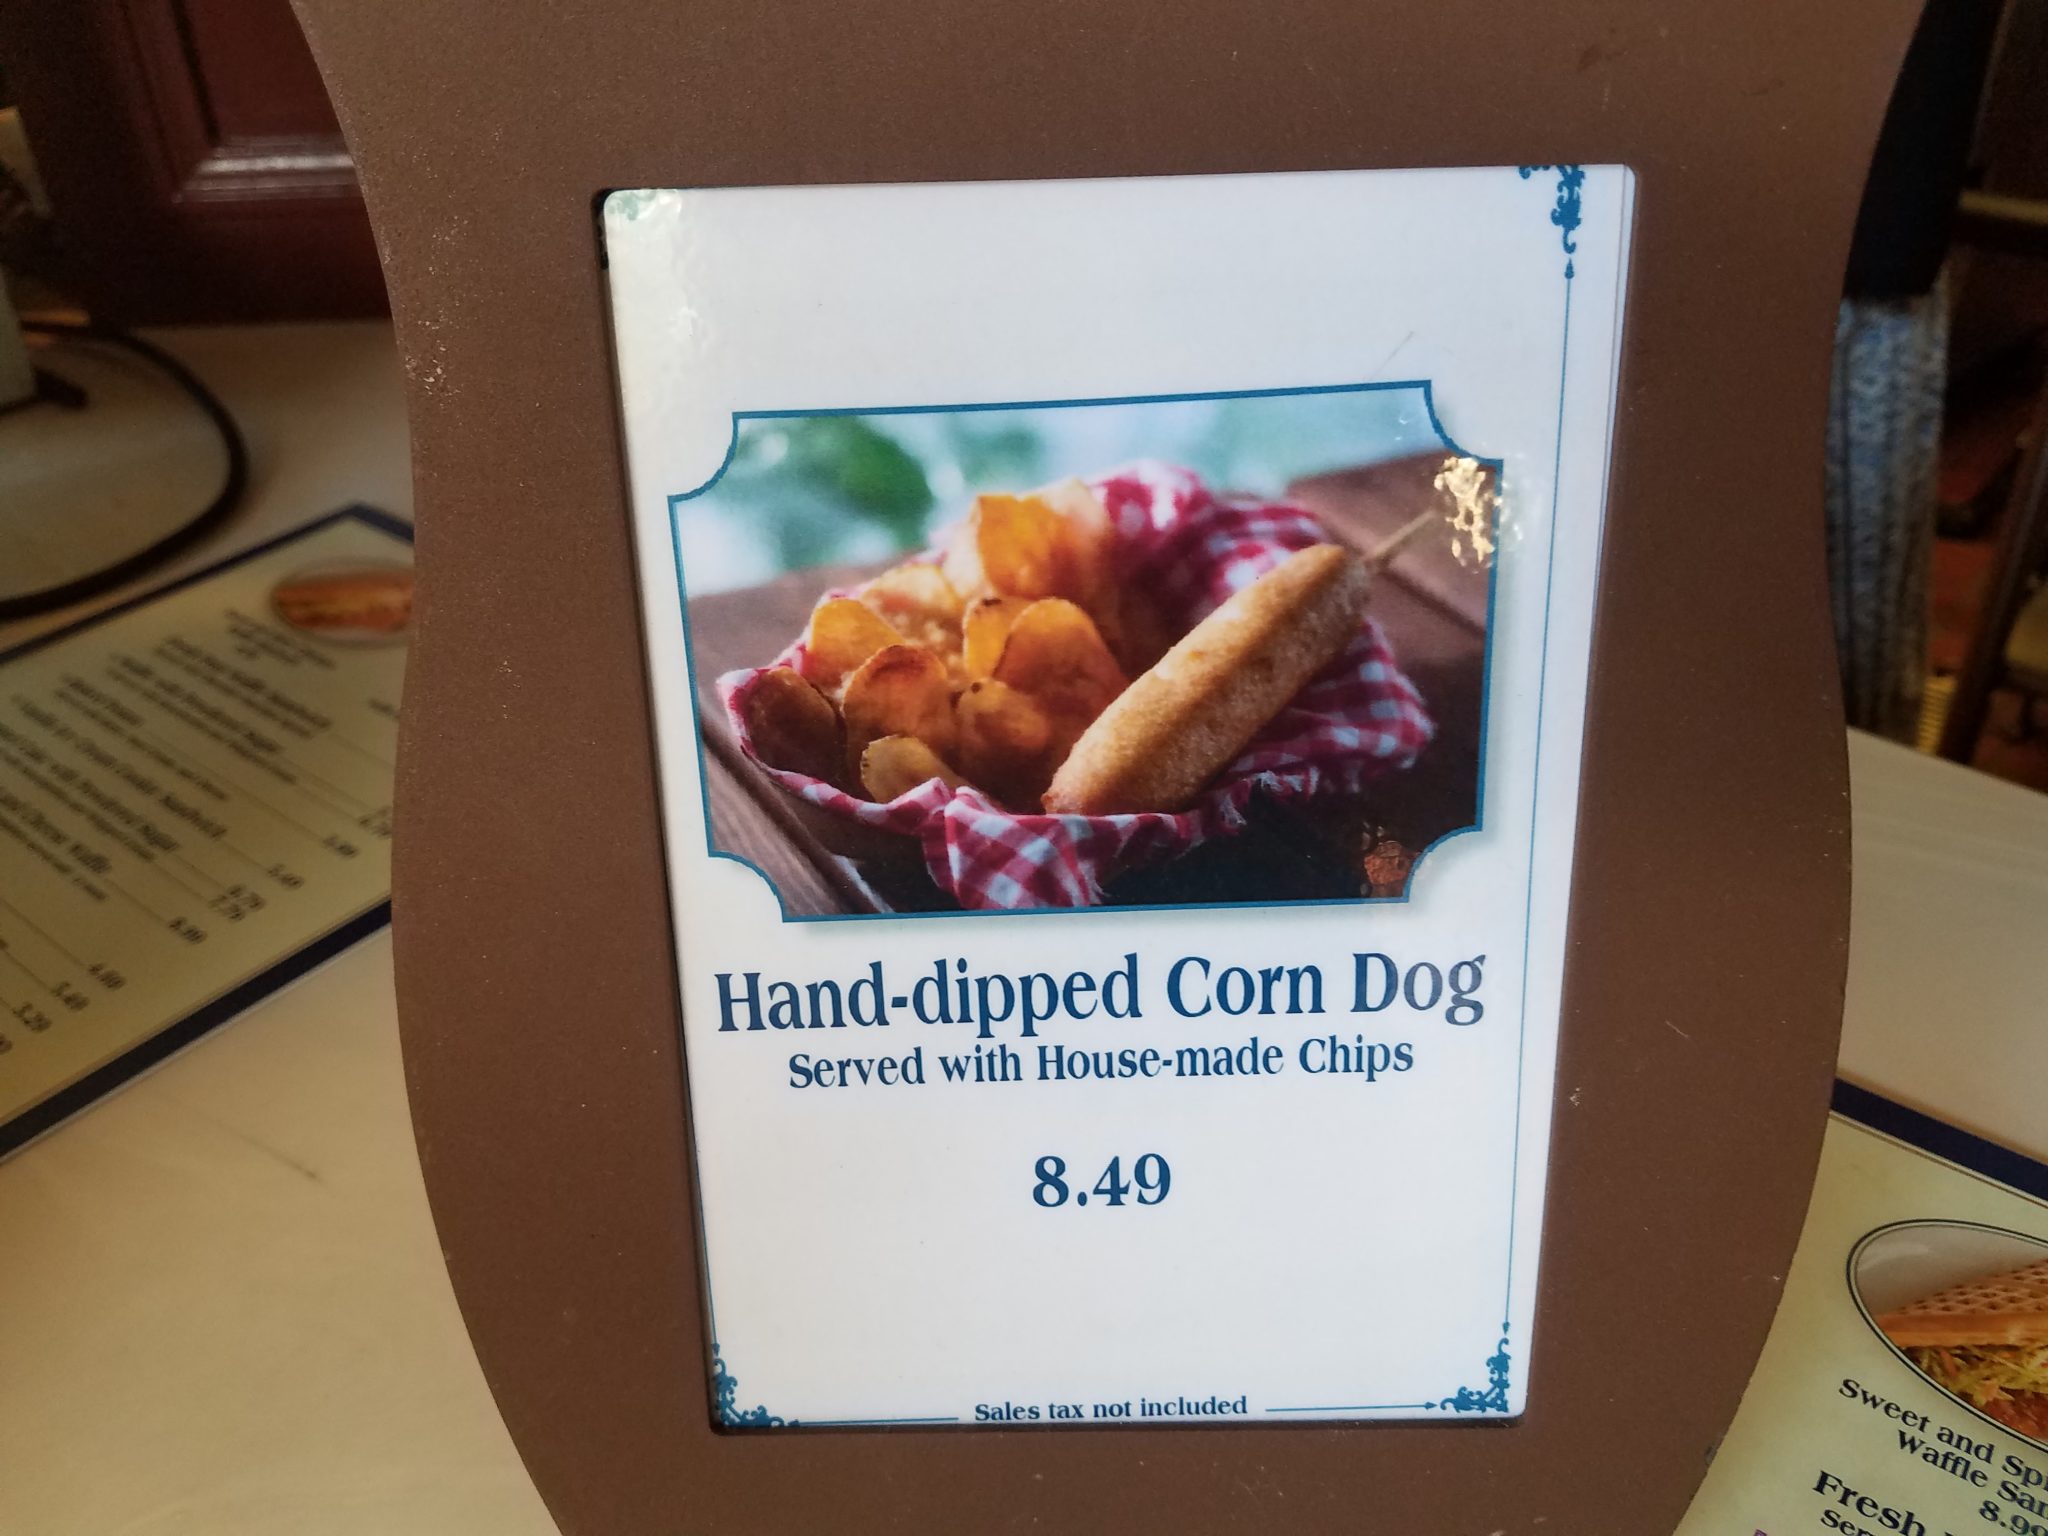 Sleepy Hollow Refreshments Now Featuring Hand-dipped Corn Dogs